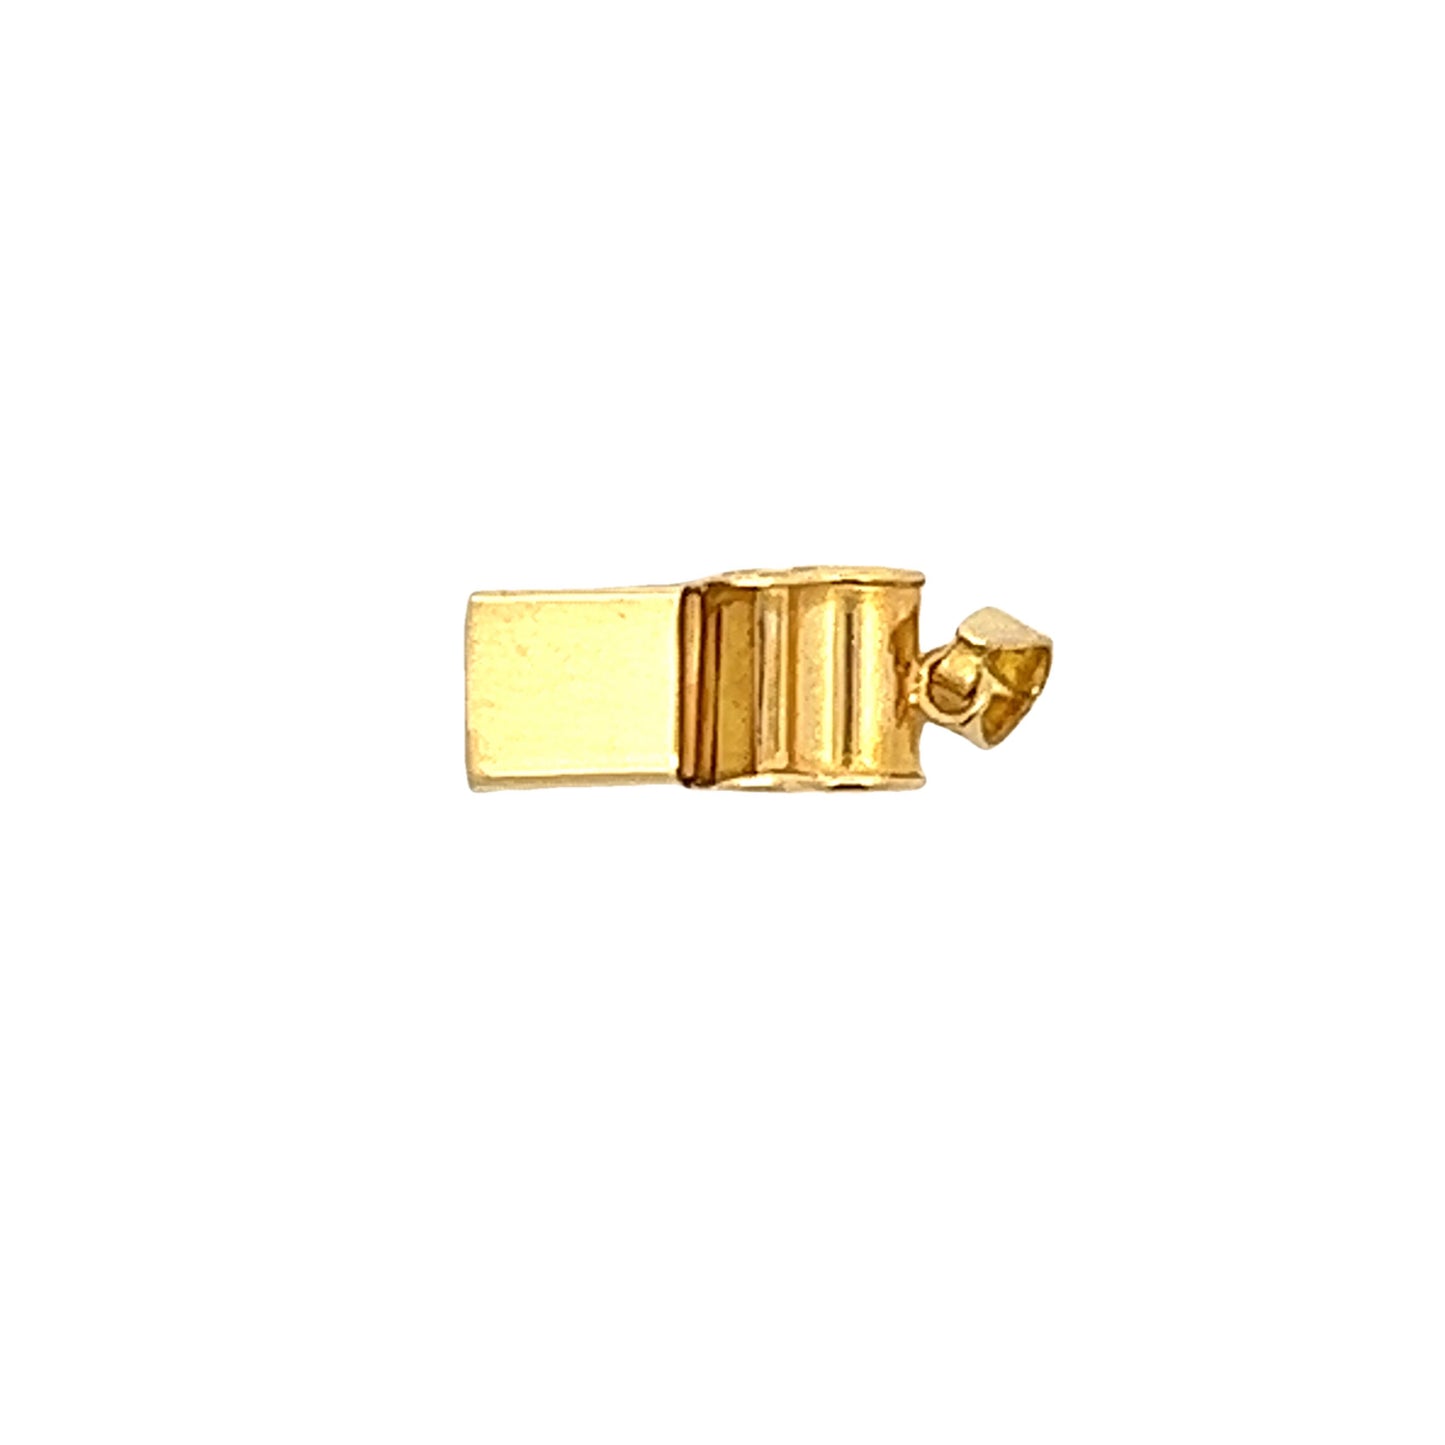 Vintage Whistle Charm in 18k Yellow Gold